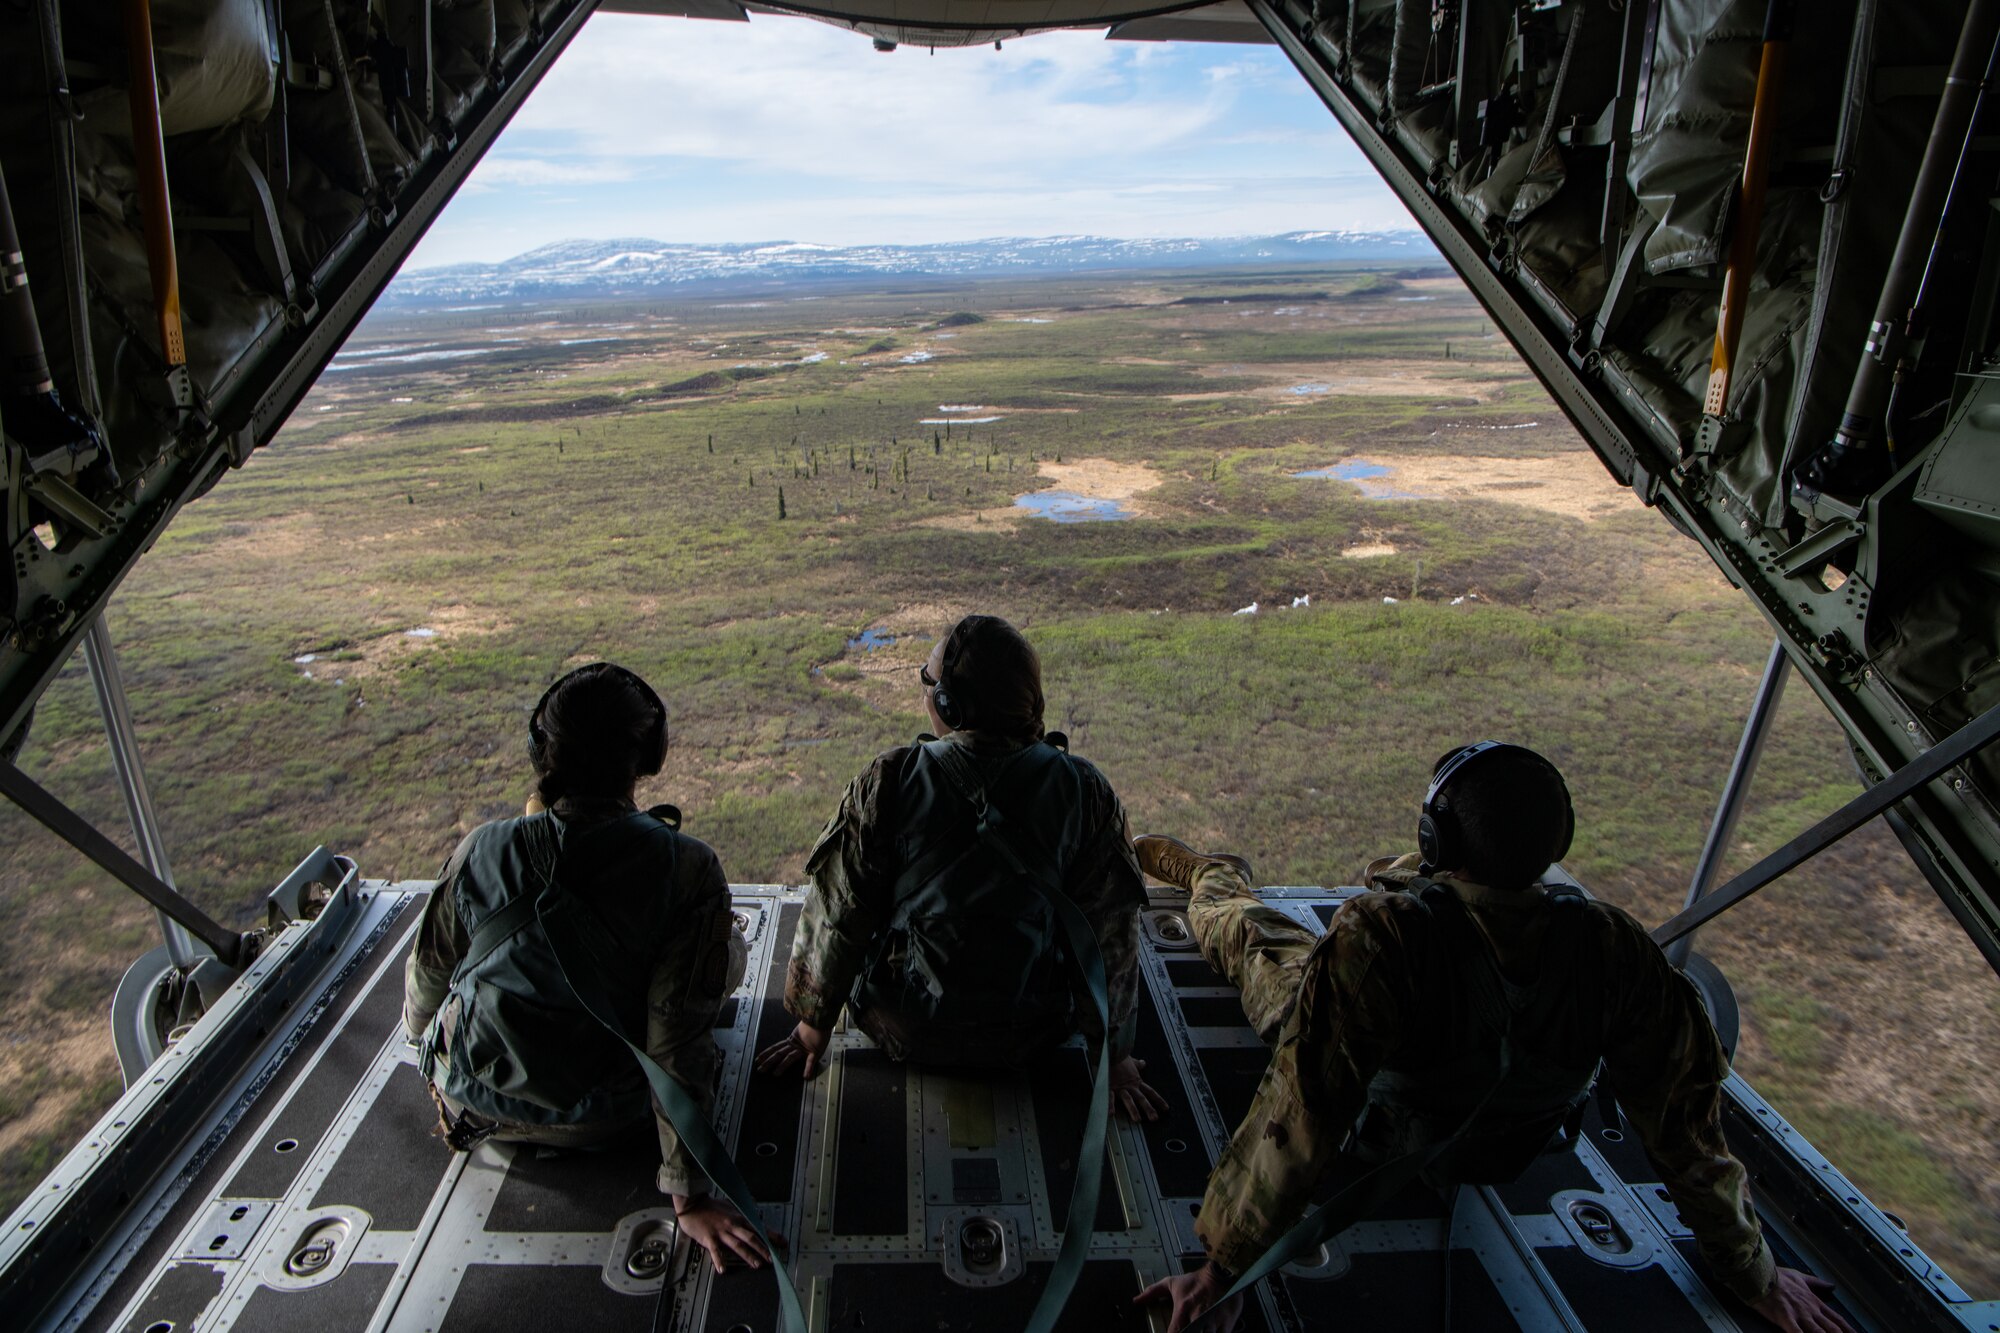 Airmen sit on the open ramp of a C-130 as it flies over mountains.